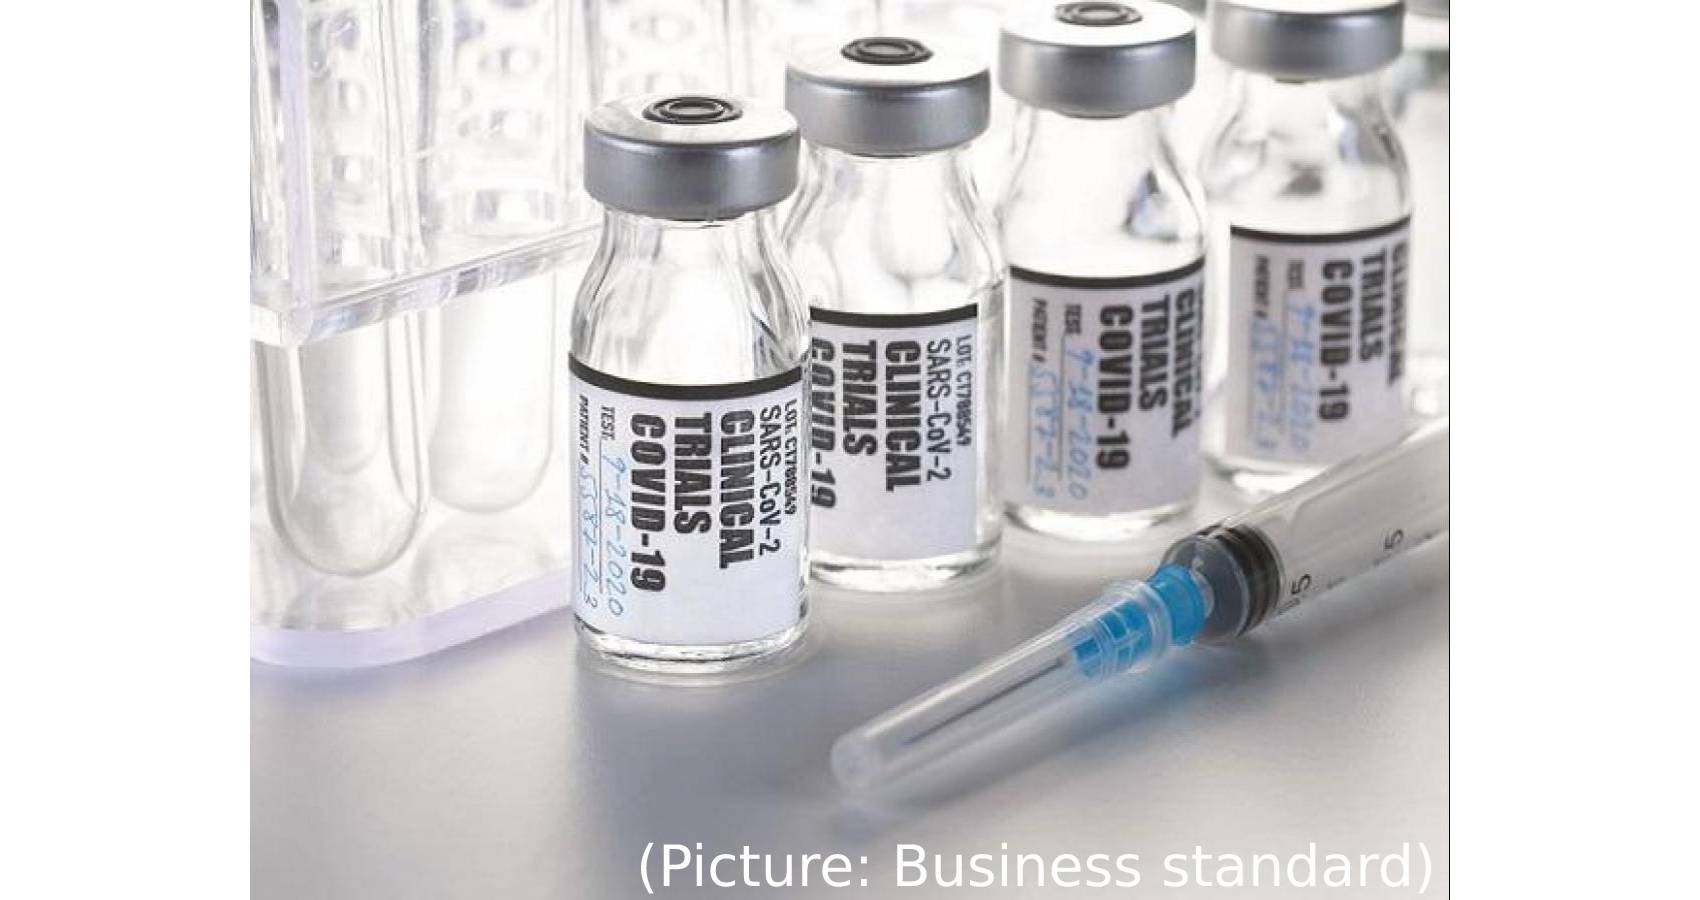 US Awaits India’s Nod To Dispatch Covid Vaccines